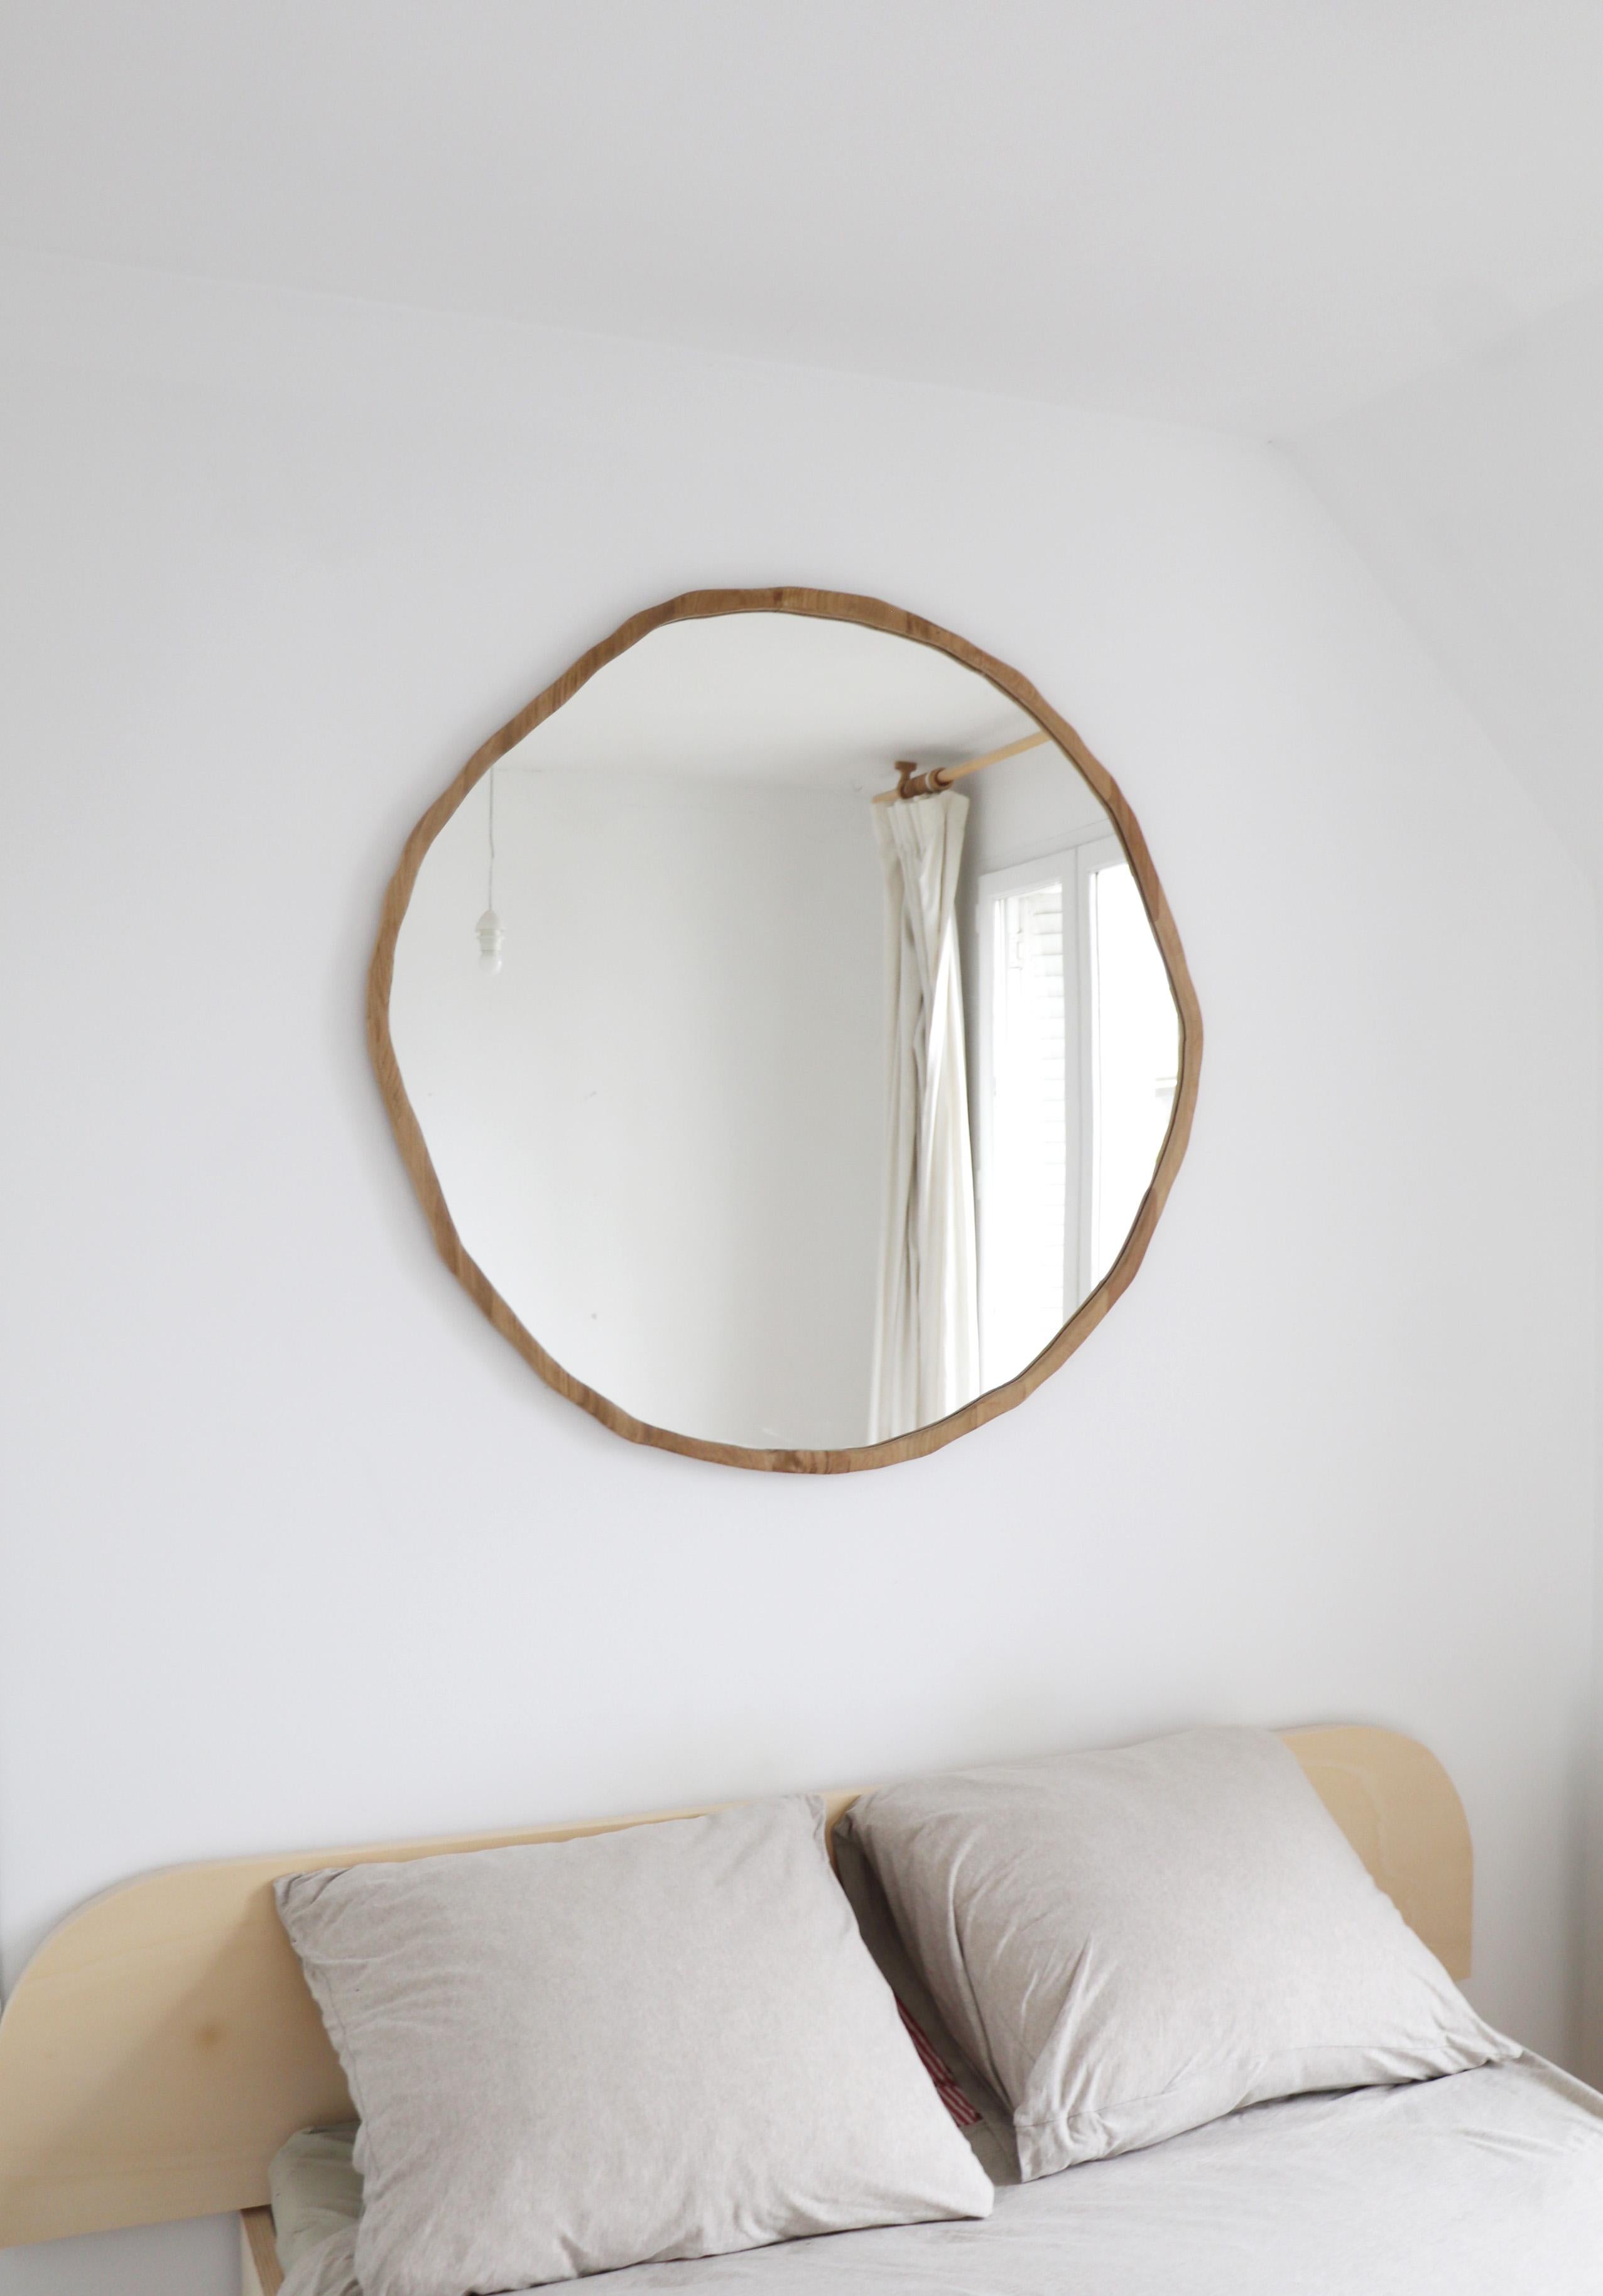 The Ondulation mirror gradually takes shape as it is cut. The oak that takes the shape of the mirror is cut with a chisel and then sanded until its surface is as soft as silk. It is available in matt or dark varnish and can be combined with other